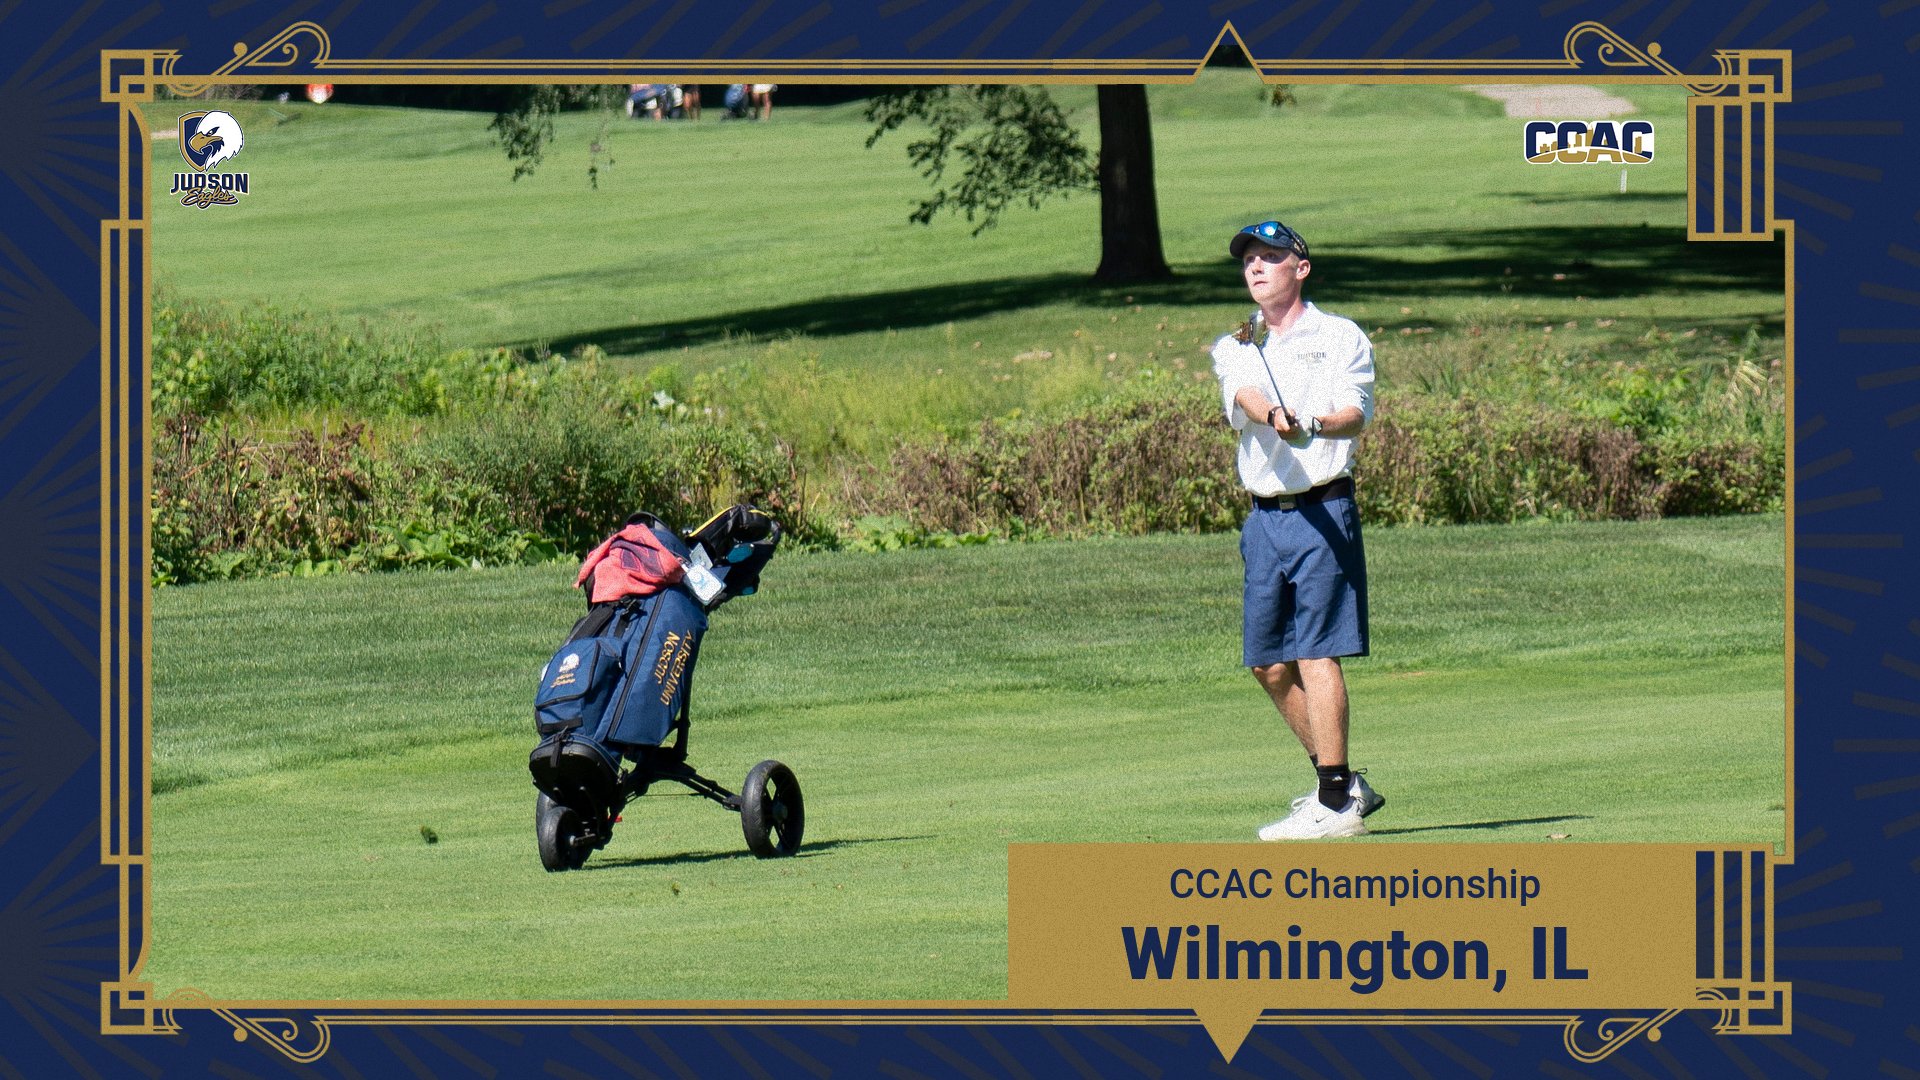 Sippy and McCoy Lead Way for Eagles at CCAC Championship